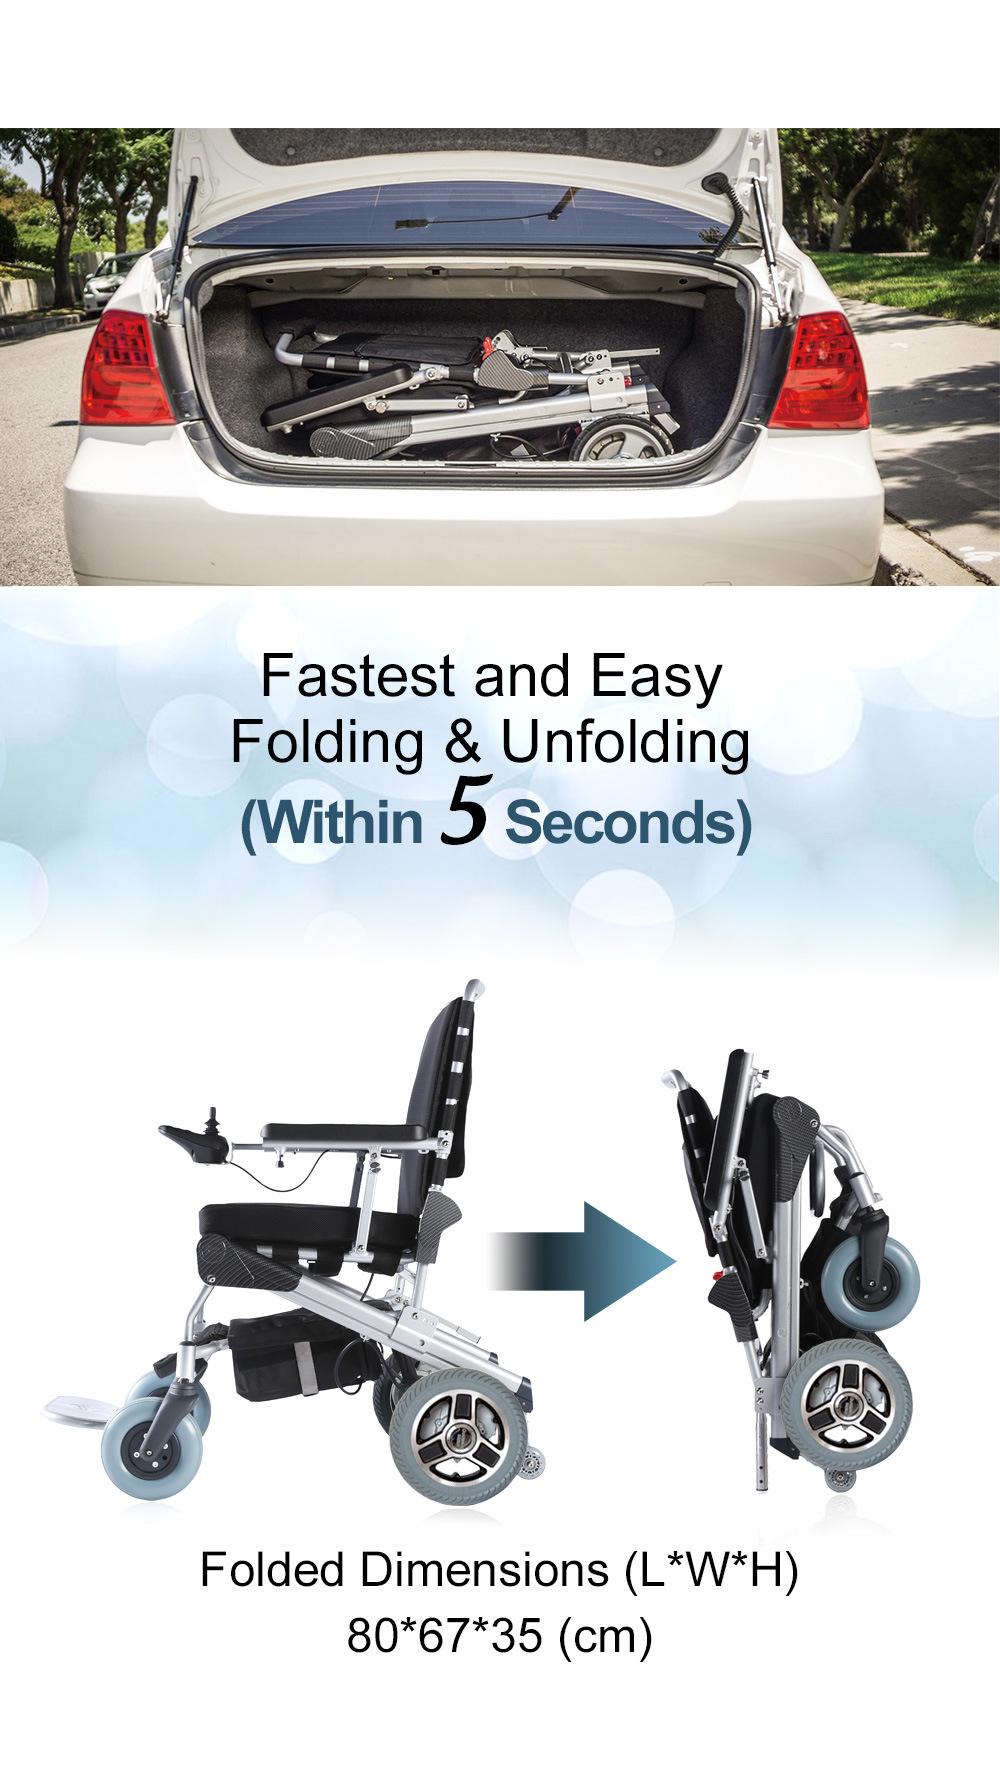 CE TUV Ultra Strong Fame, Patented Design, With 5 angles back rest, portable and folding power electric wheelchair with 10′′ quick Release motors, 15kg only